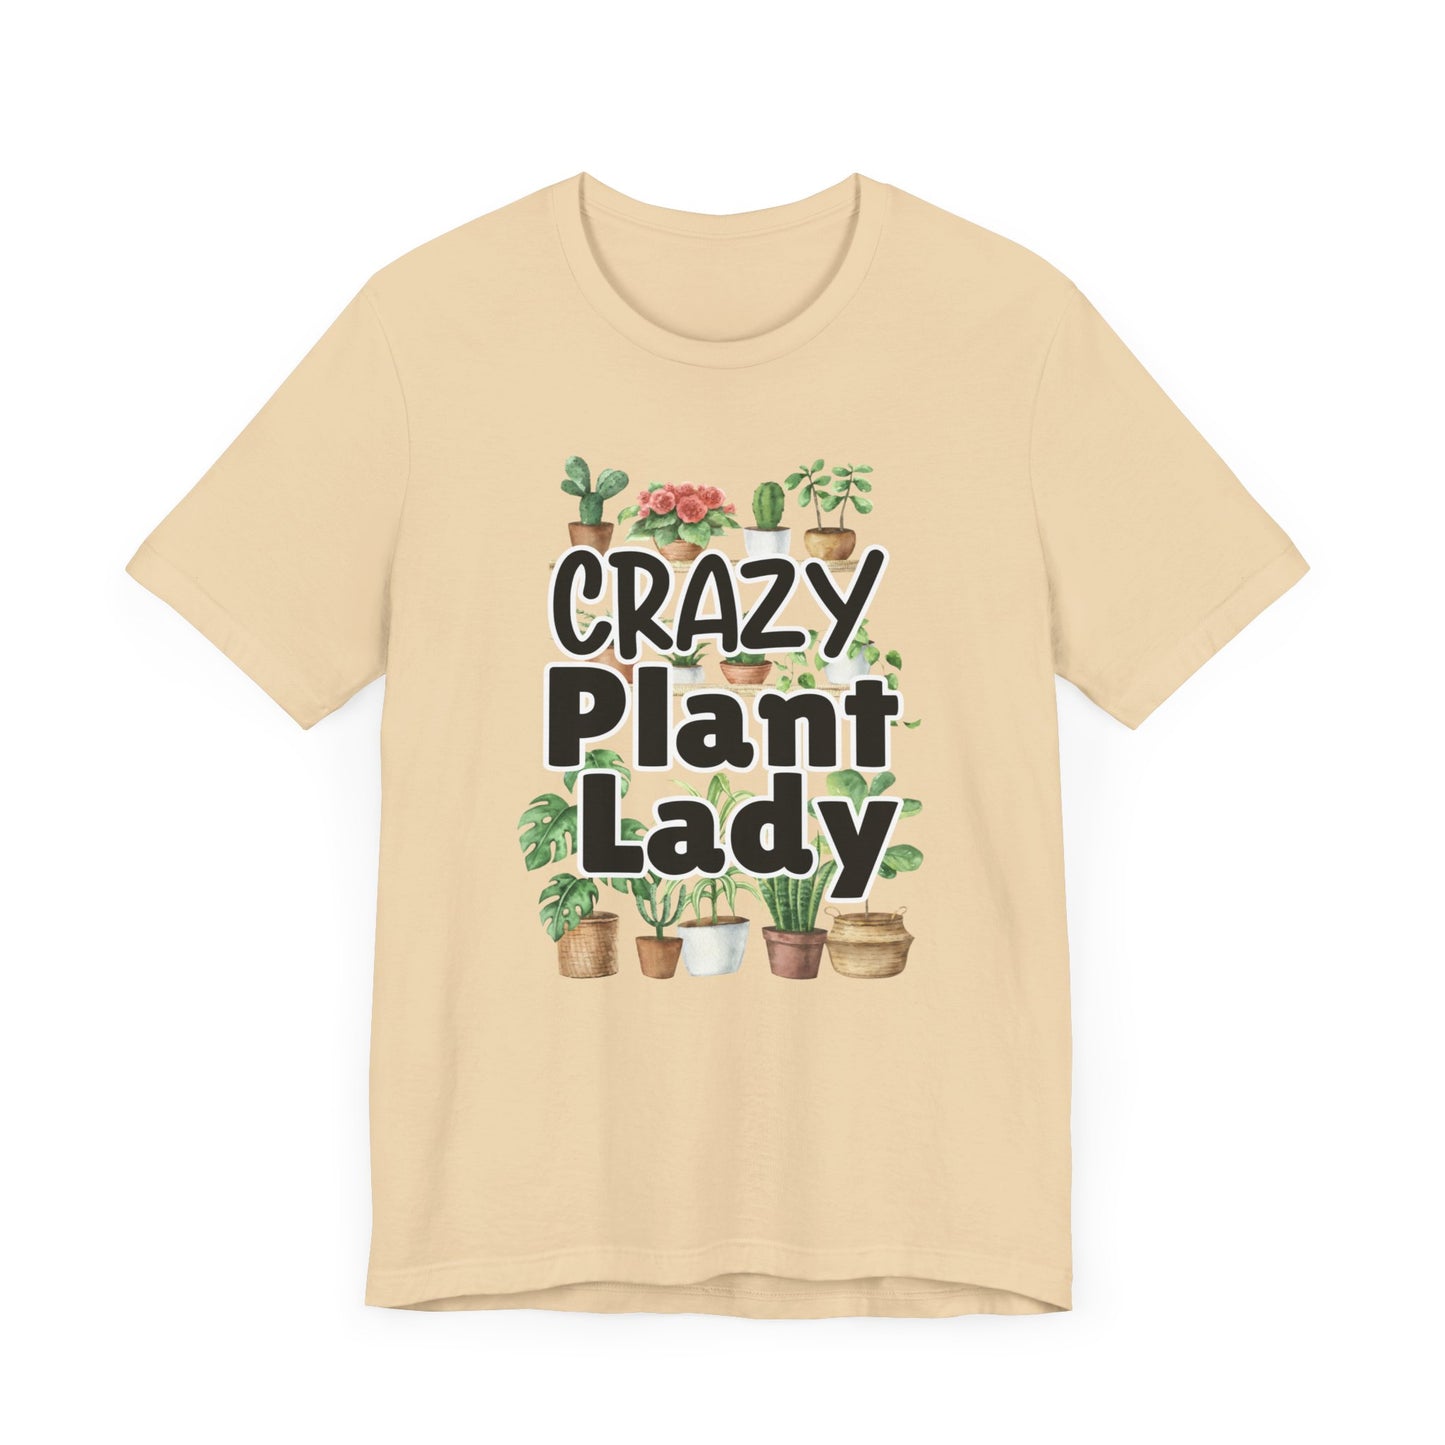 Crazy Plant Lady Shirt Gift for Gardener Shirt for Person who Loves Plants